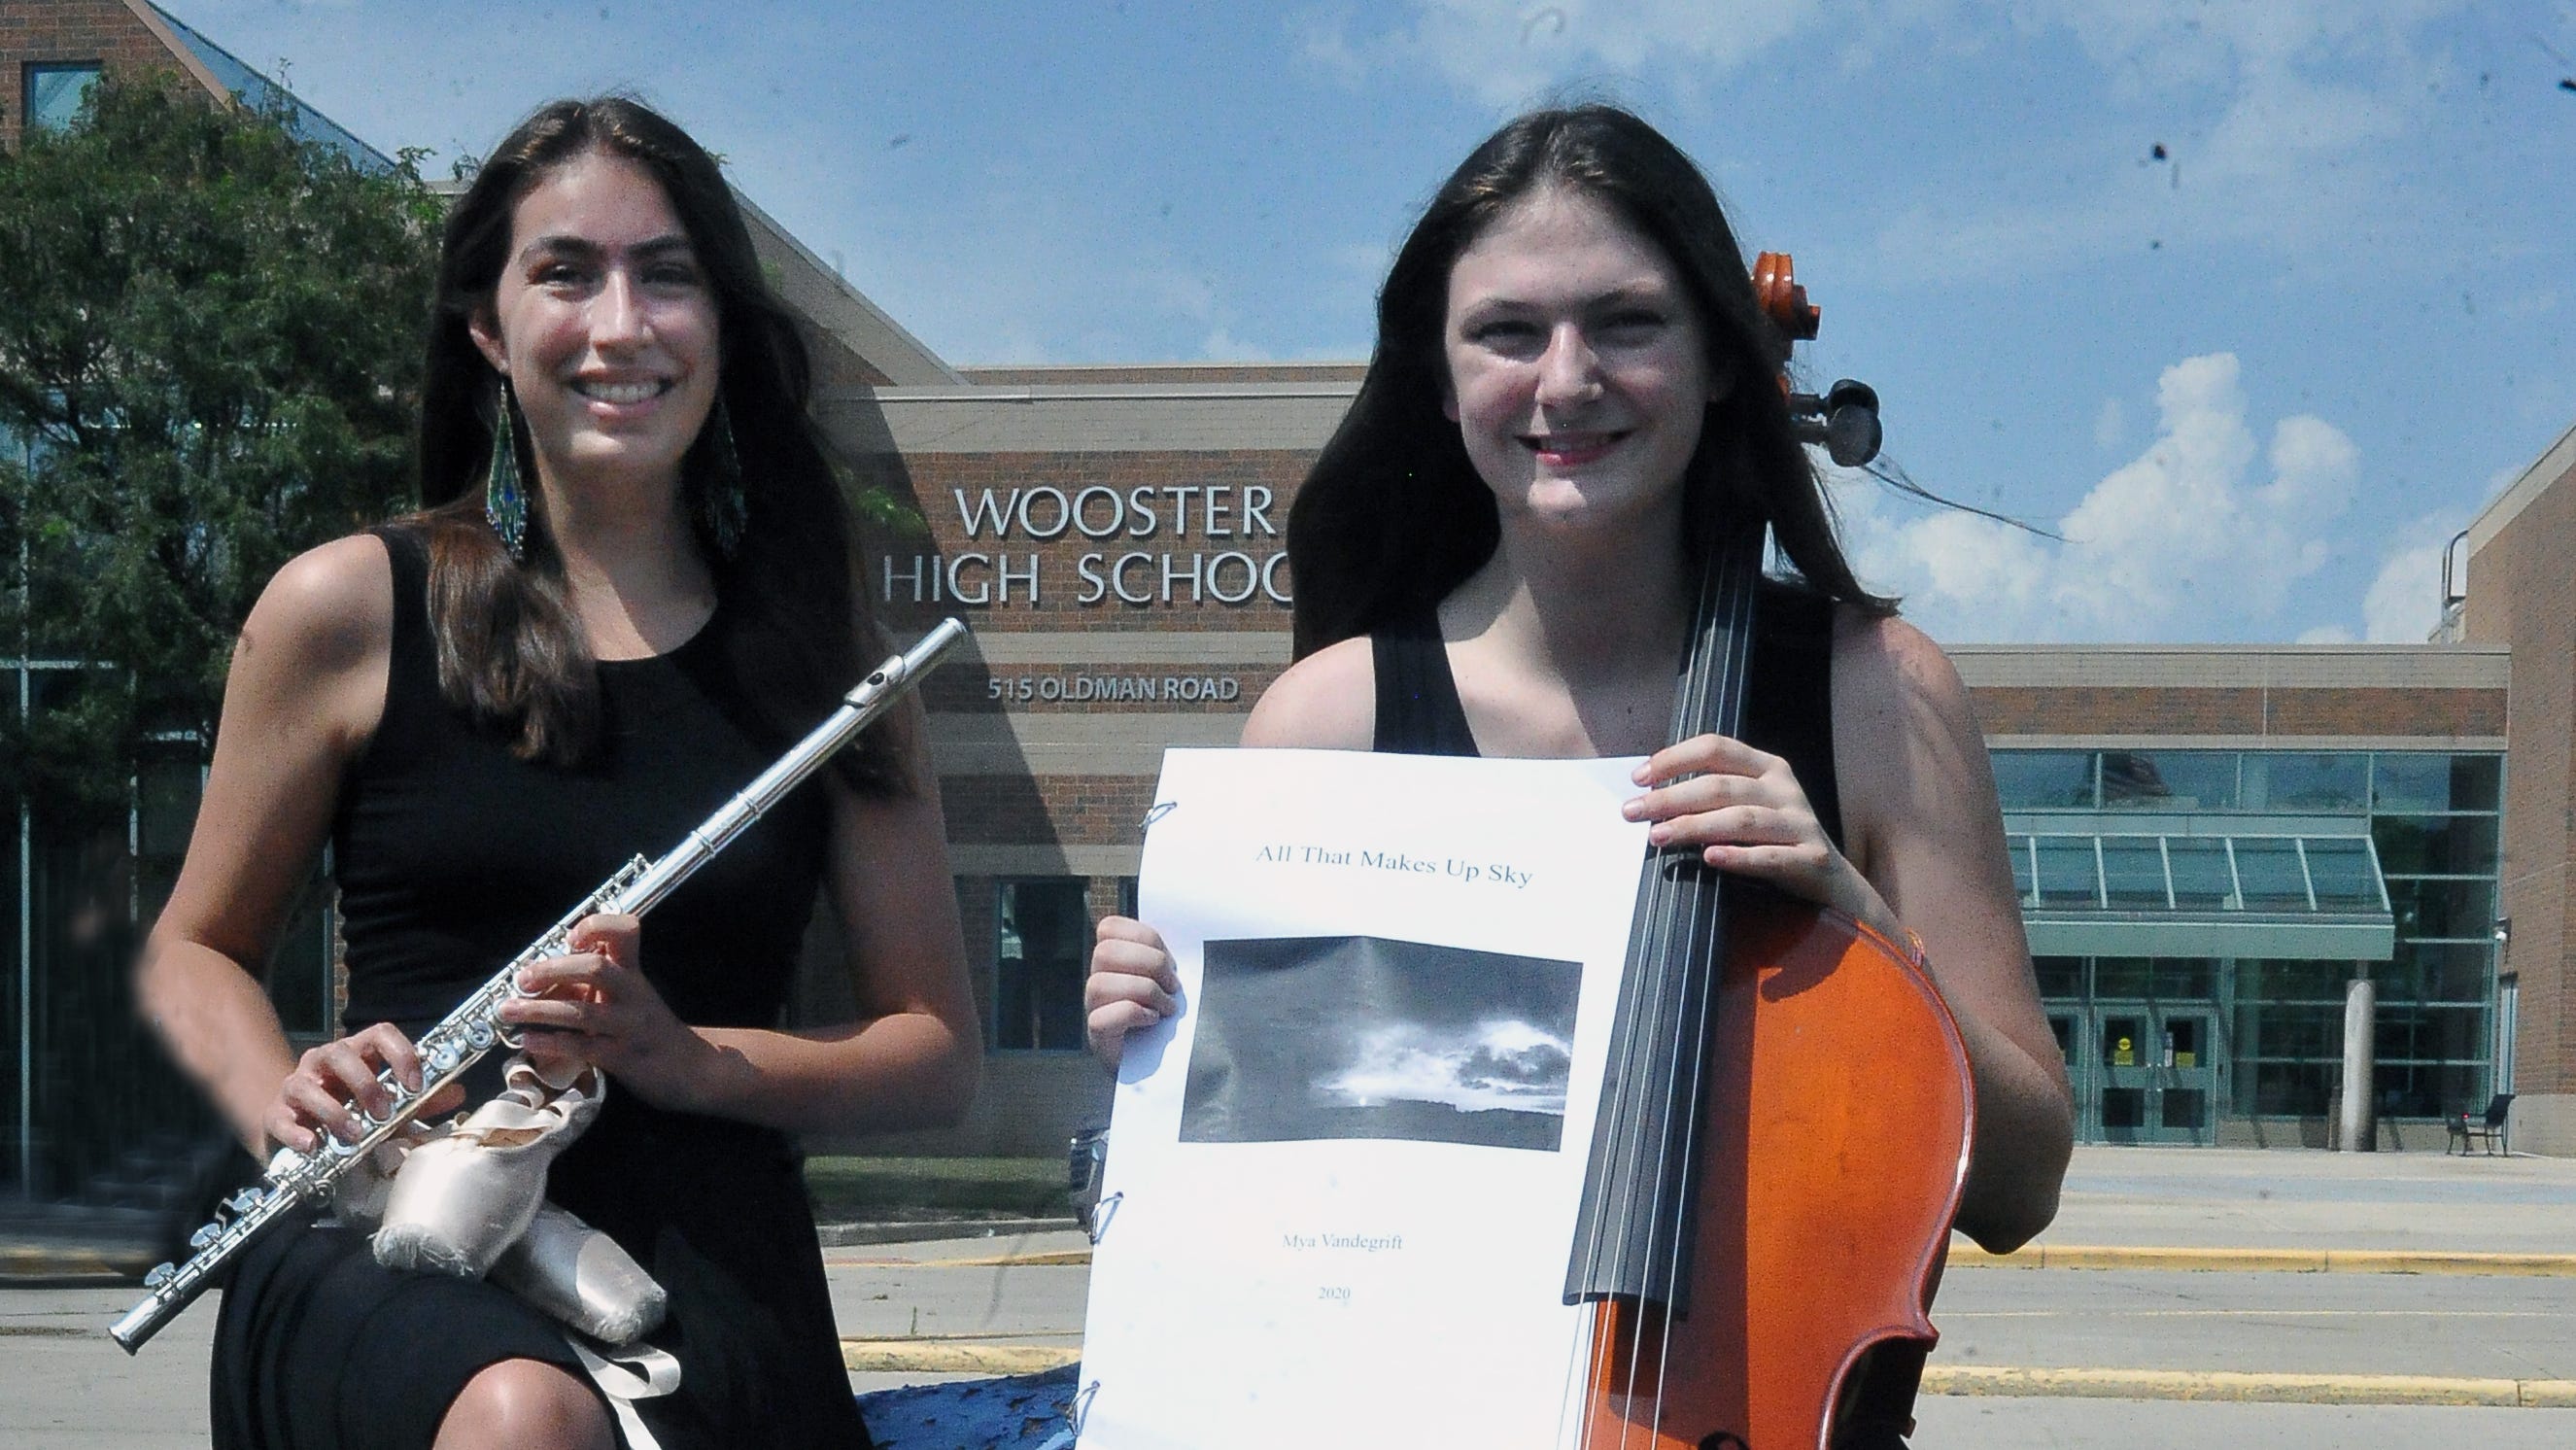 Wooster High School graduates promote pursuing arts honors diploma